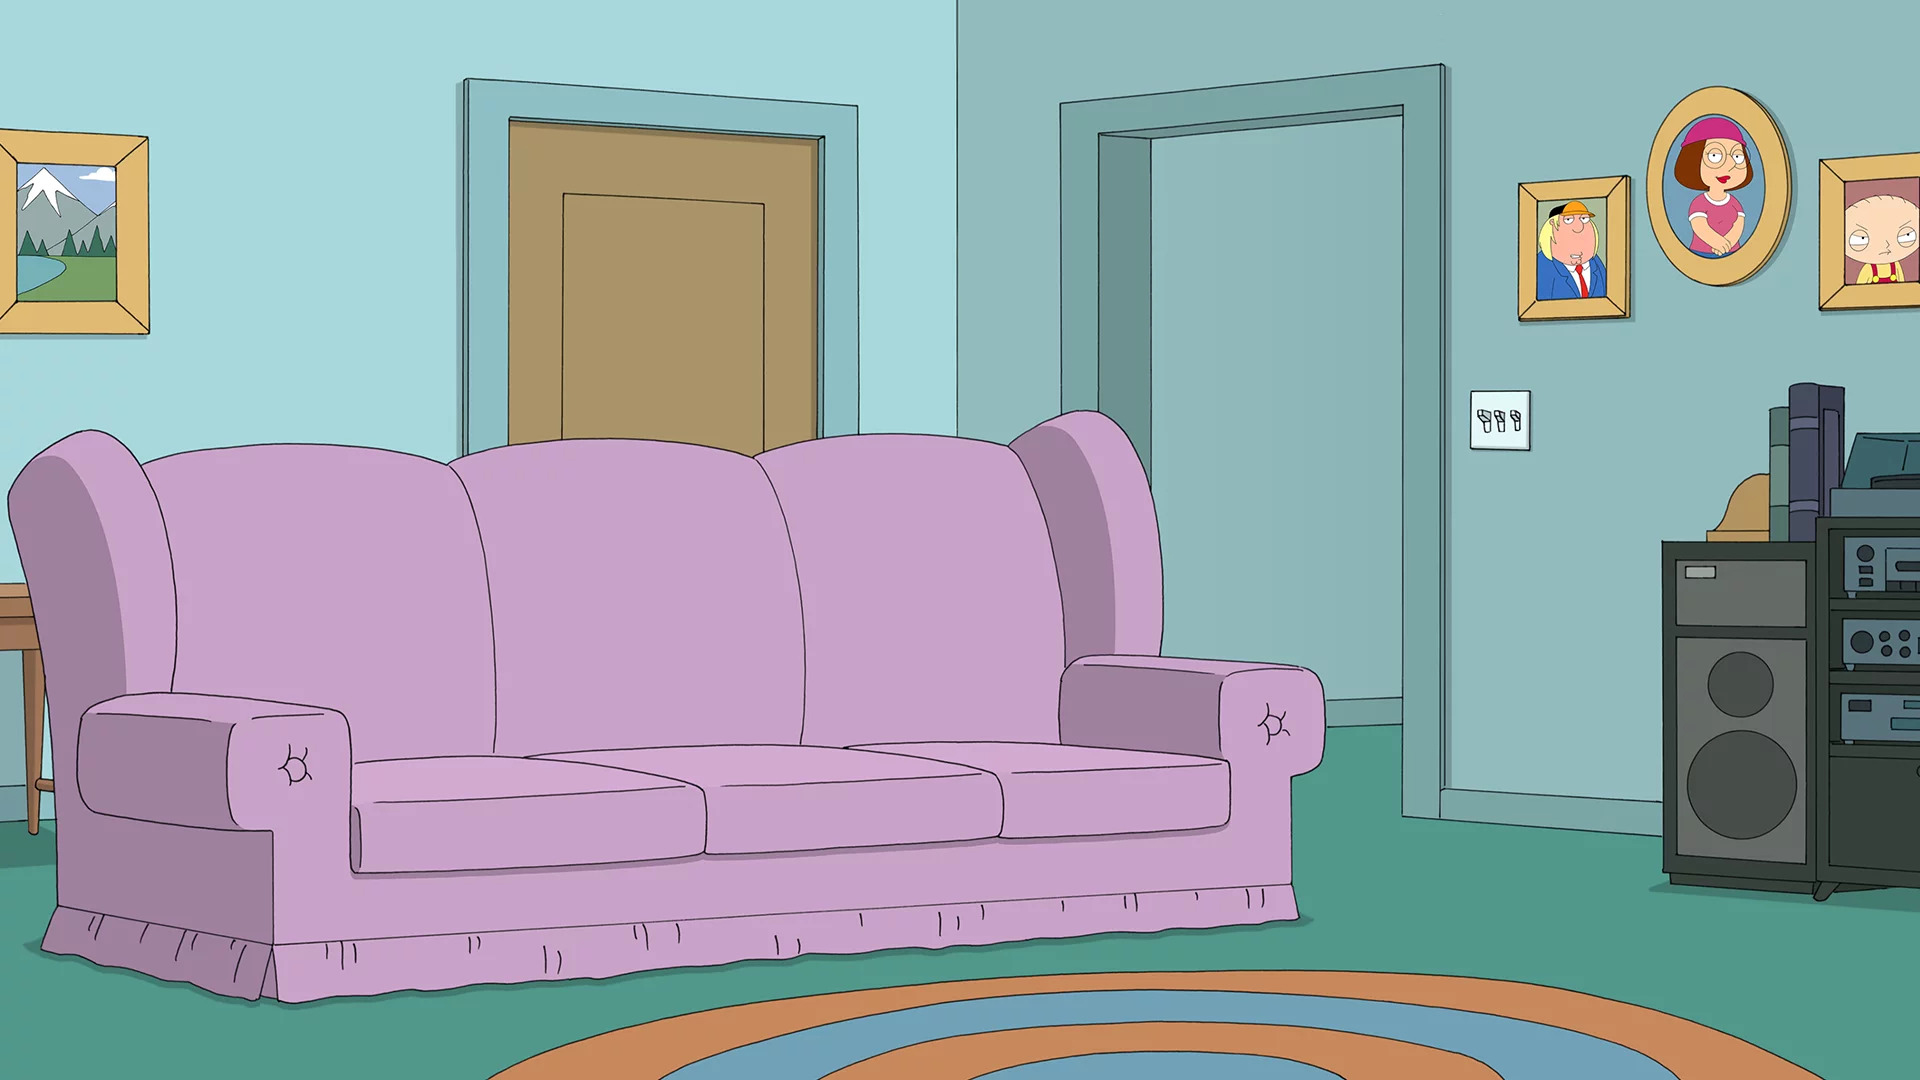 Family Guy living room. Virtual background to use on Zoom, Microsoft Teams, Skype, Google Meet, WebEx or any other compatible app.